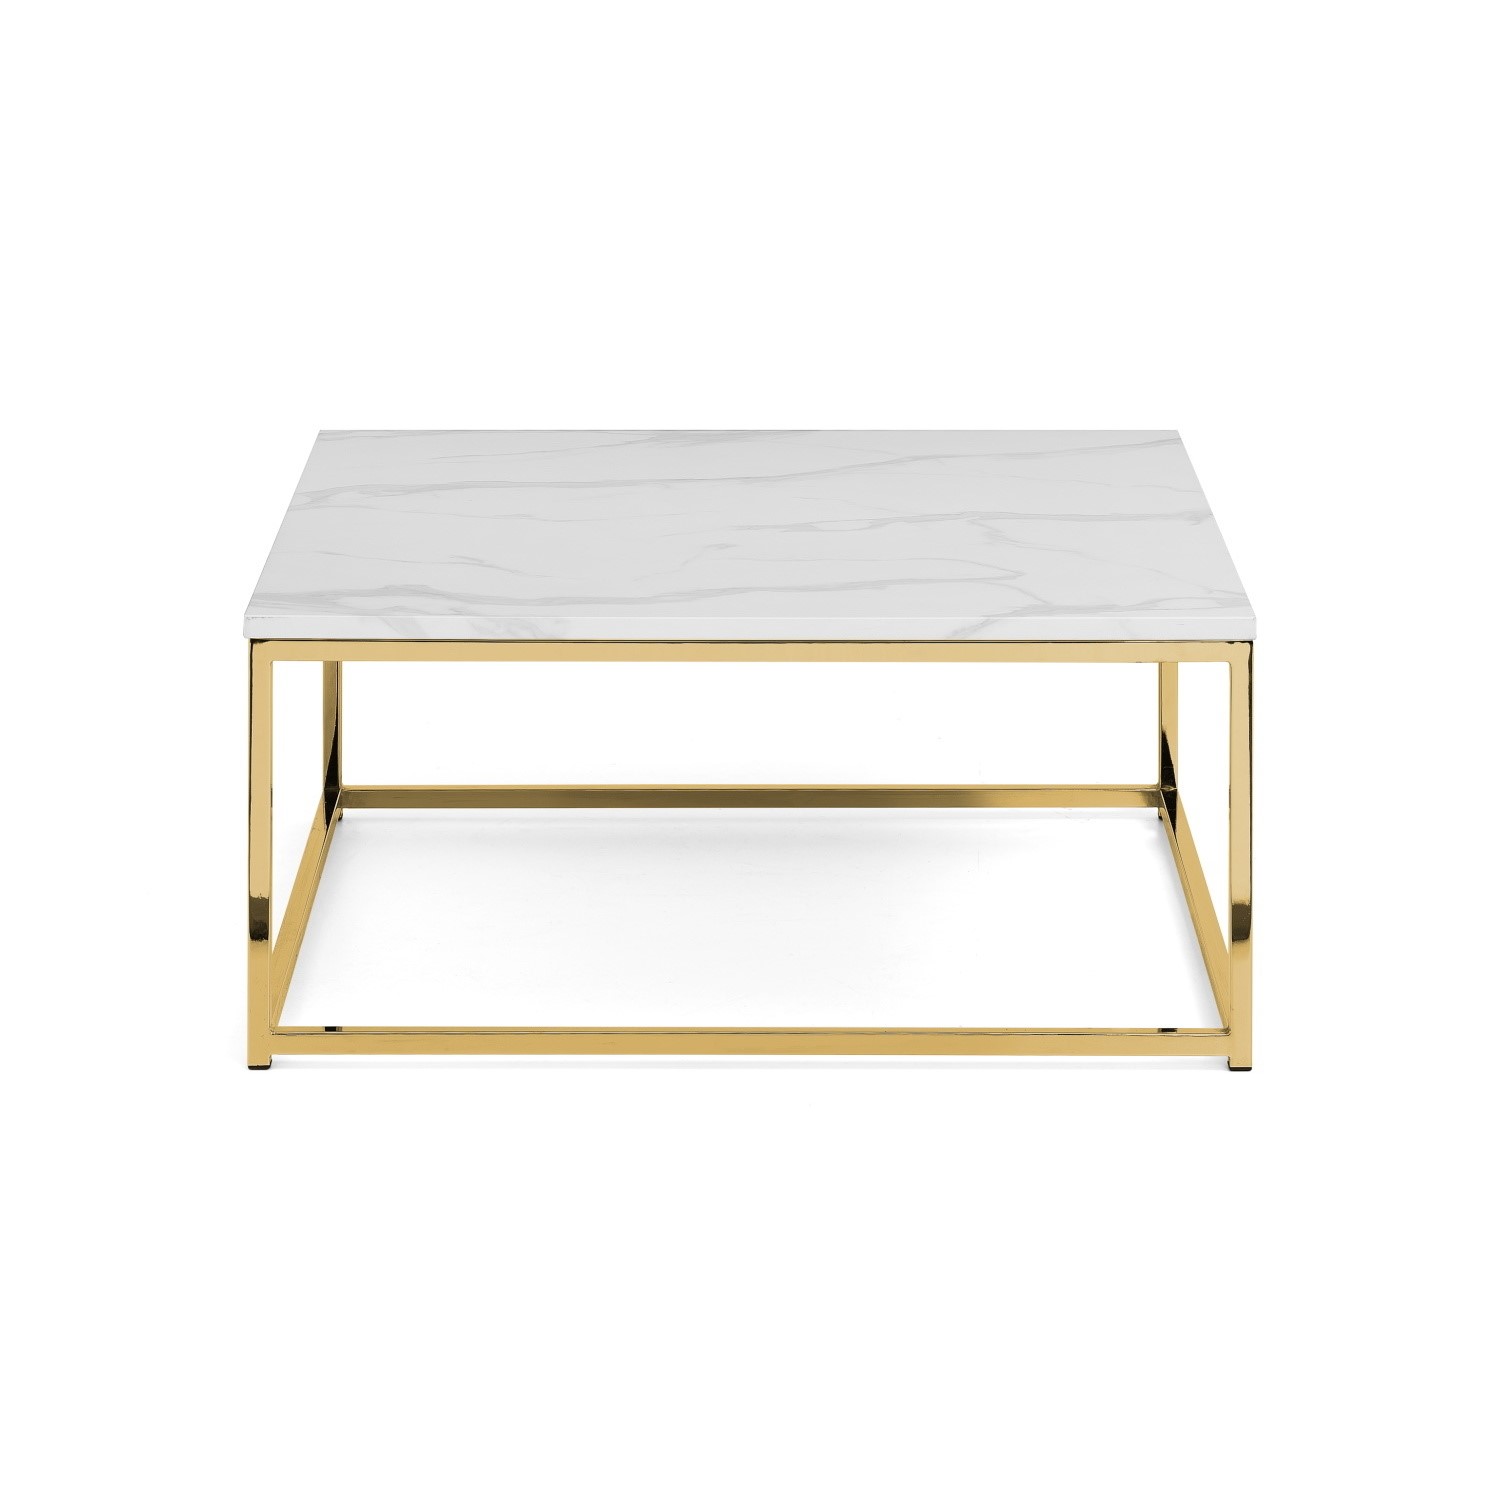 Photo of Small square marble coffee table with gold legs - julian bowen